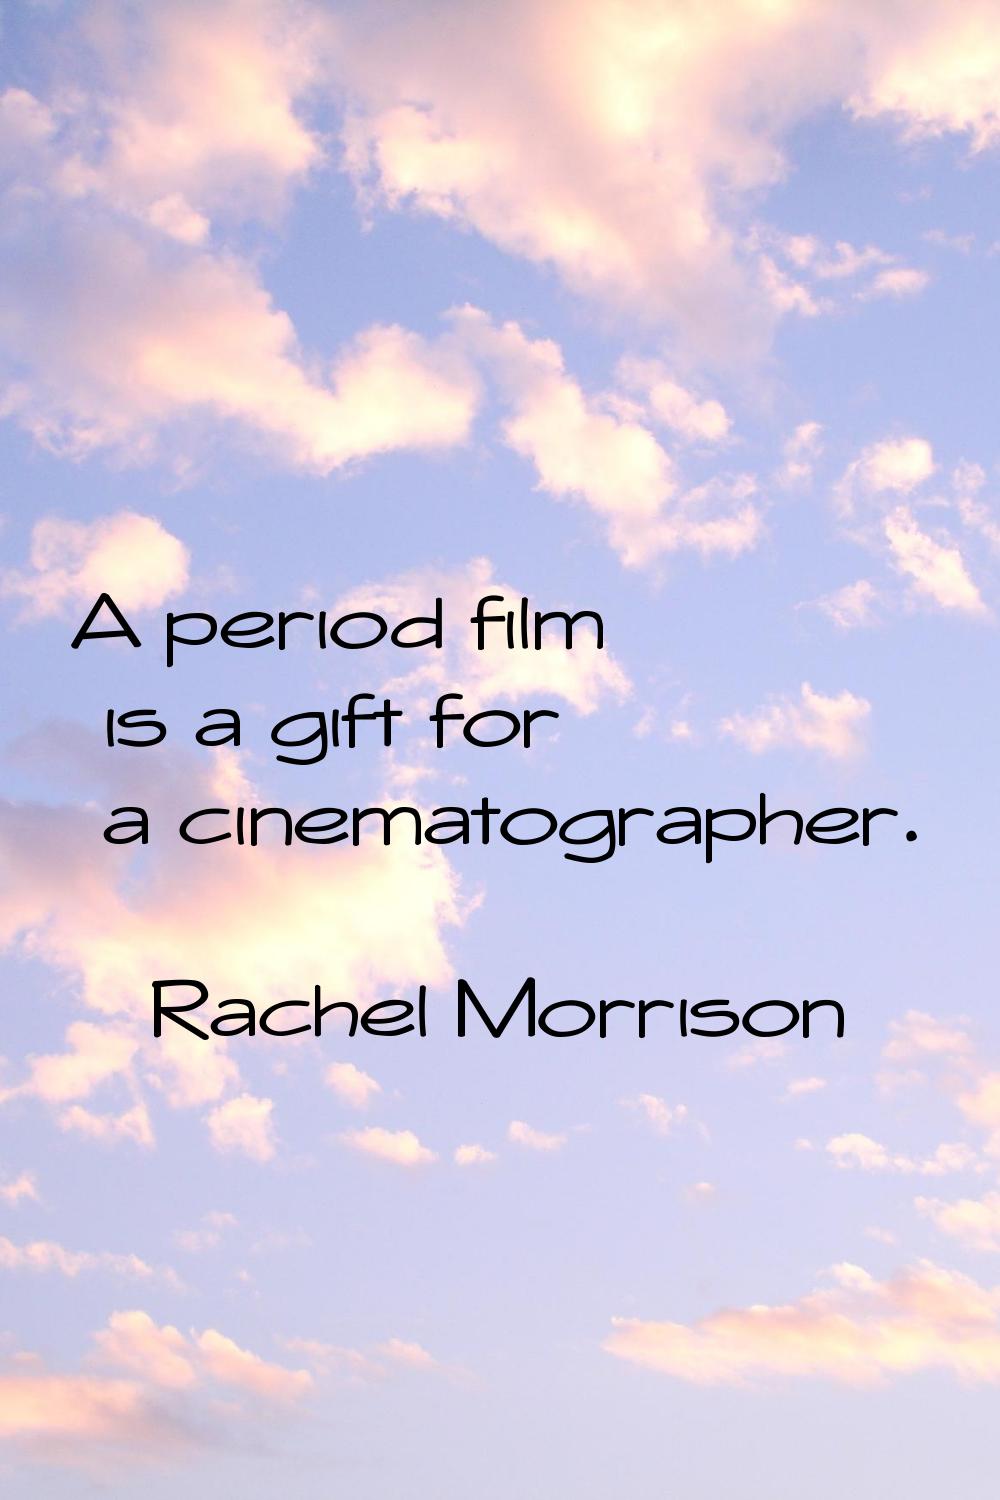 A period film is a gift for a cinematographer.